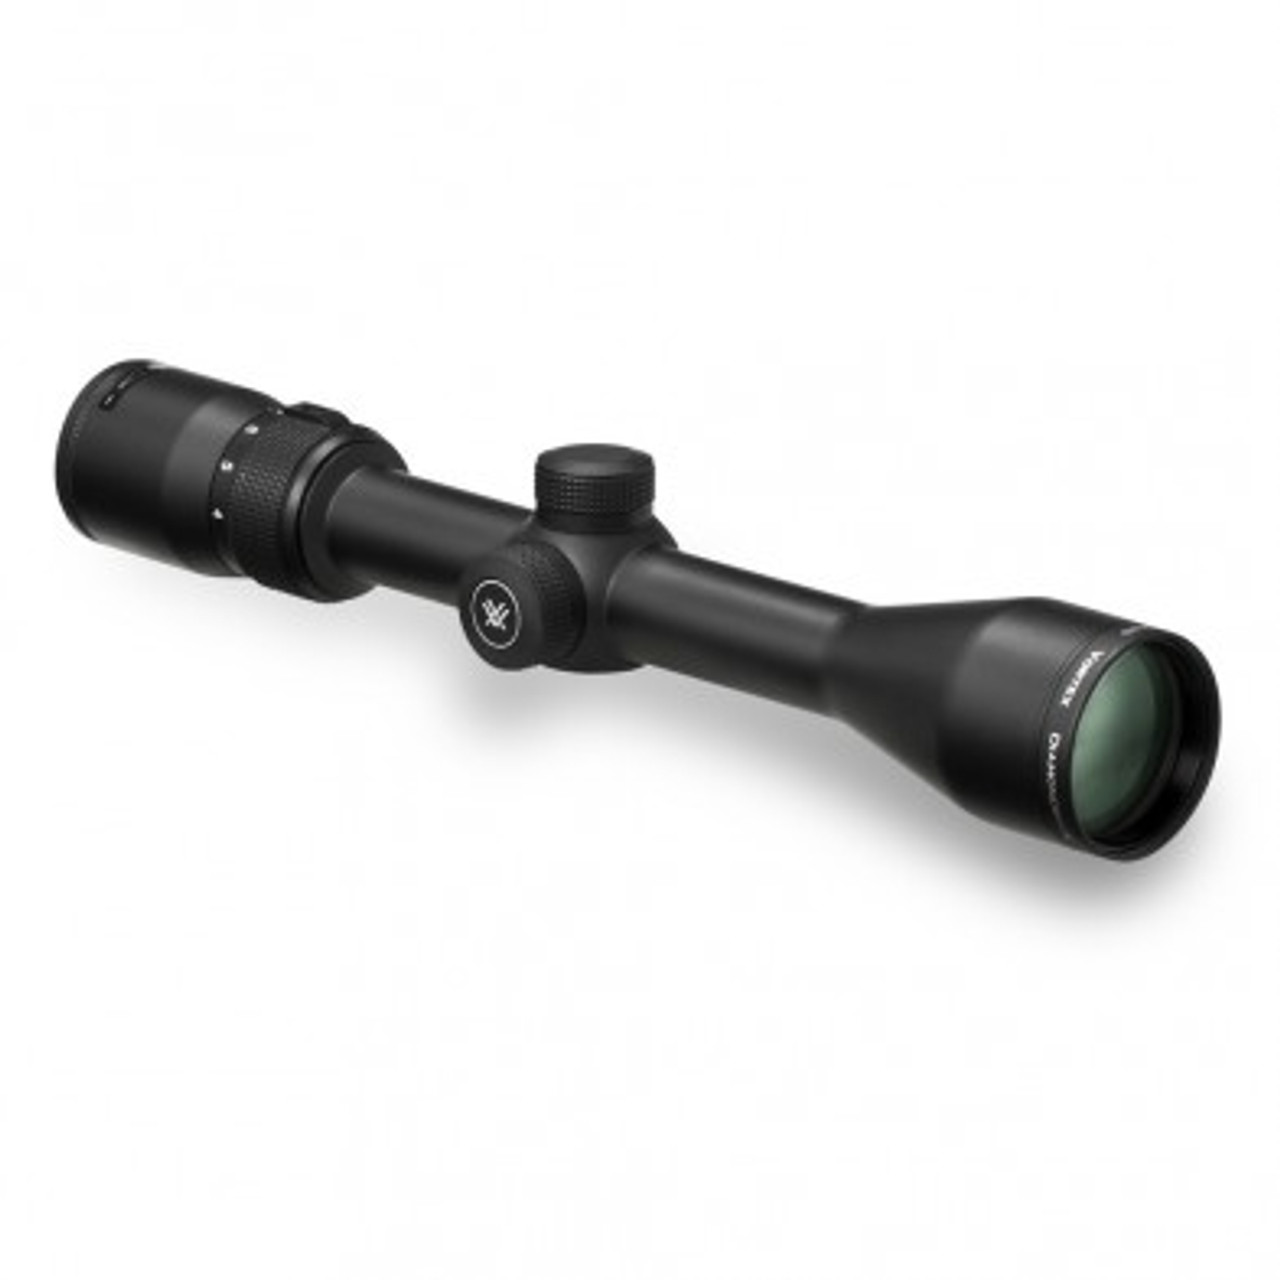 VORTEX DIAMONDBACK 4-12X40 RIFLESCOPE BDC
VT-DBK-04-BDC
Diamondback riflescopes are loaded with features. First, the solid one-piece aircraft-grade aluminum alloy construction makes the Diamondback riflescope virtually indestructible and highly resistant to magnum recoil. Argon purging puts waterproof and fogproof performance on the agenda, and advanced fully multi-coated optics raise an eyebrow when crystal clear, tack-sharp images appear in the crosshairs. Look for all this and more in a riflescope you'd expect to cost quite a bit more, but doesn't.

SKU	VT-DBK-04-BDC
Magnification	4 – 12
Objective Lens Diameter	40 mm
Eye Relief	3.1 inches
Field of View	32.4–11.3 feet/100 yards
Tube Size	1 inch
Turret Style	Capped
Adjustment Graduation	1/4 MOA
Travel per Rotation	15 MOA
Max Elevation Adjustment	60 MOA
Max Windage Adjustment	60 MOA
Parallax Setting	100 yards
Length	12 inches
Weight	14.6 ounces
Riflescope Manual (.pdf)	Download PDF
Reticle Manual (.pdf)	Download PDF
Included in the Box
Removable lens covers
Lens cloth

 
VIP Unconditional Lifetime Warranty
Diamondback Dimensions
Lengths
L1	L2	L3	L4	L5	L6
12.0	2.46	2.15	5.85	3.0	3.1
Heights
H1	H2
1.89	1.69
Dimensions measured in inches.

OPTICAL FEATURES
Fully Multi-Coated	Increases light transmission with multiple anti-reflective coatings on all air-to-glass surfaces.
Second Focal Plane Reticle	Scale of reticle maintains the same ideally-sized appearance. Listed reticle subtensions used for estimating range, holdover and wind drift correction are accurate at the highest magnification.
CONSTRUCTION FEATURES
Tube Size	1-inch diameter.
Single-Piece Tube	Maximizes alignment for improved accuracy and optimum visual performance, as well as ensures strength and waterproofness.
Aircraft-Grade Aluminum	Constructed from a solid block of aircraft-grade aluminum for strength and rigidity.
Waterproof	O-ring seals prevent moisture, dust and debris from penetrating the riflescope for reliable performance in all environments.
Fogproof	Argon gas purging prevents internal fogging over a wide range of temperatures.
Shockproof	Rugged construction withstands recoil and impact.
Hard Anodized Finish	Highly durable low-glare matte finish helps camouflage the shooter's position.
Precision-Glide Erector System	Uses premium components in the zoom lens mechanism to ensure smooth magnification changes under the harshest conditions.
Capped Reset Turrets	Allow re-indexing of the turret to zero after sighting in the riflescope. Caps provide external protection for turret.
INTERNAL MECHANISM DESIGN FEATURES
Precision-Glide Erector System	Uses premium components in the zoom lens mechanism to ensure smooth magnification changes under the harshest conditions.
CONVENIENCE FEATURES
Fast Focus Eyepiece	Allows quick and easy reticle focusing.